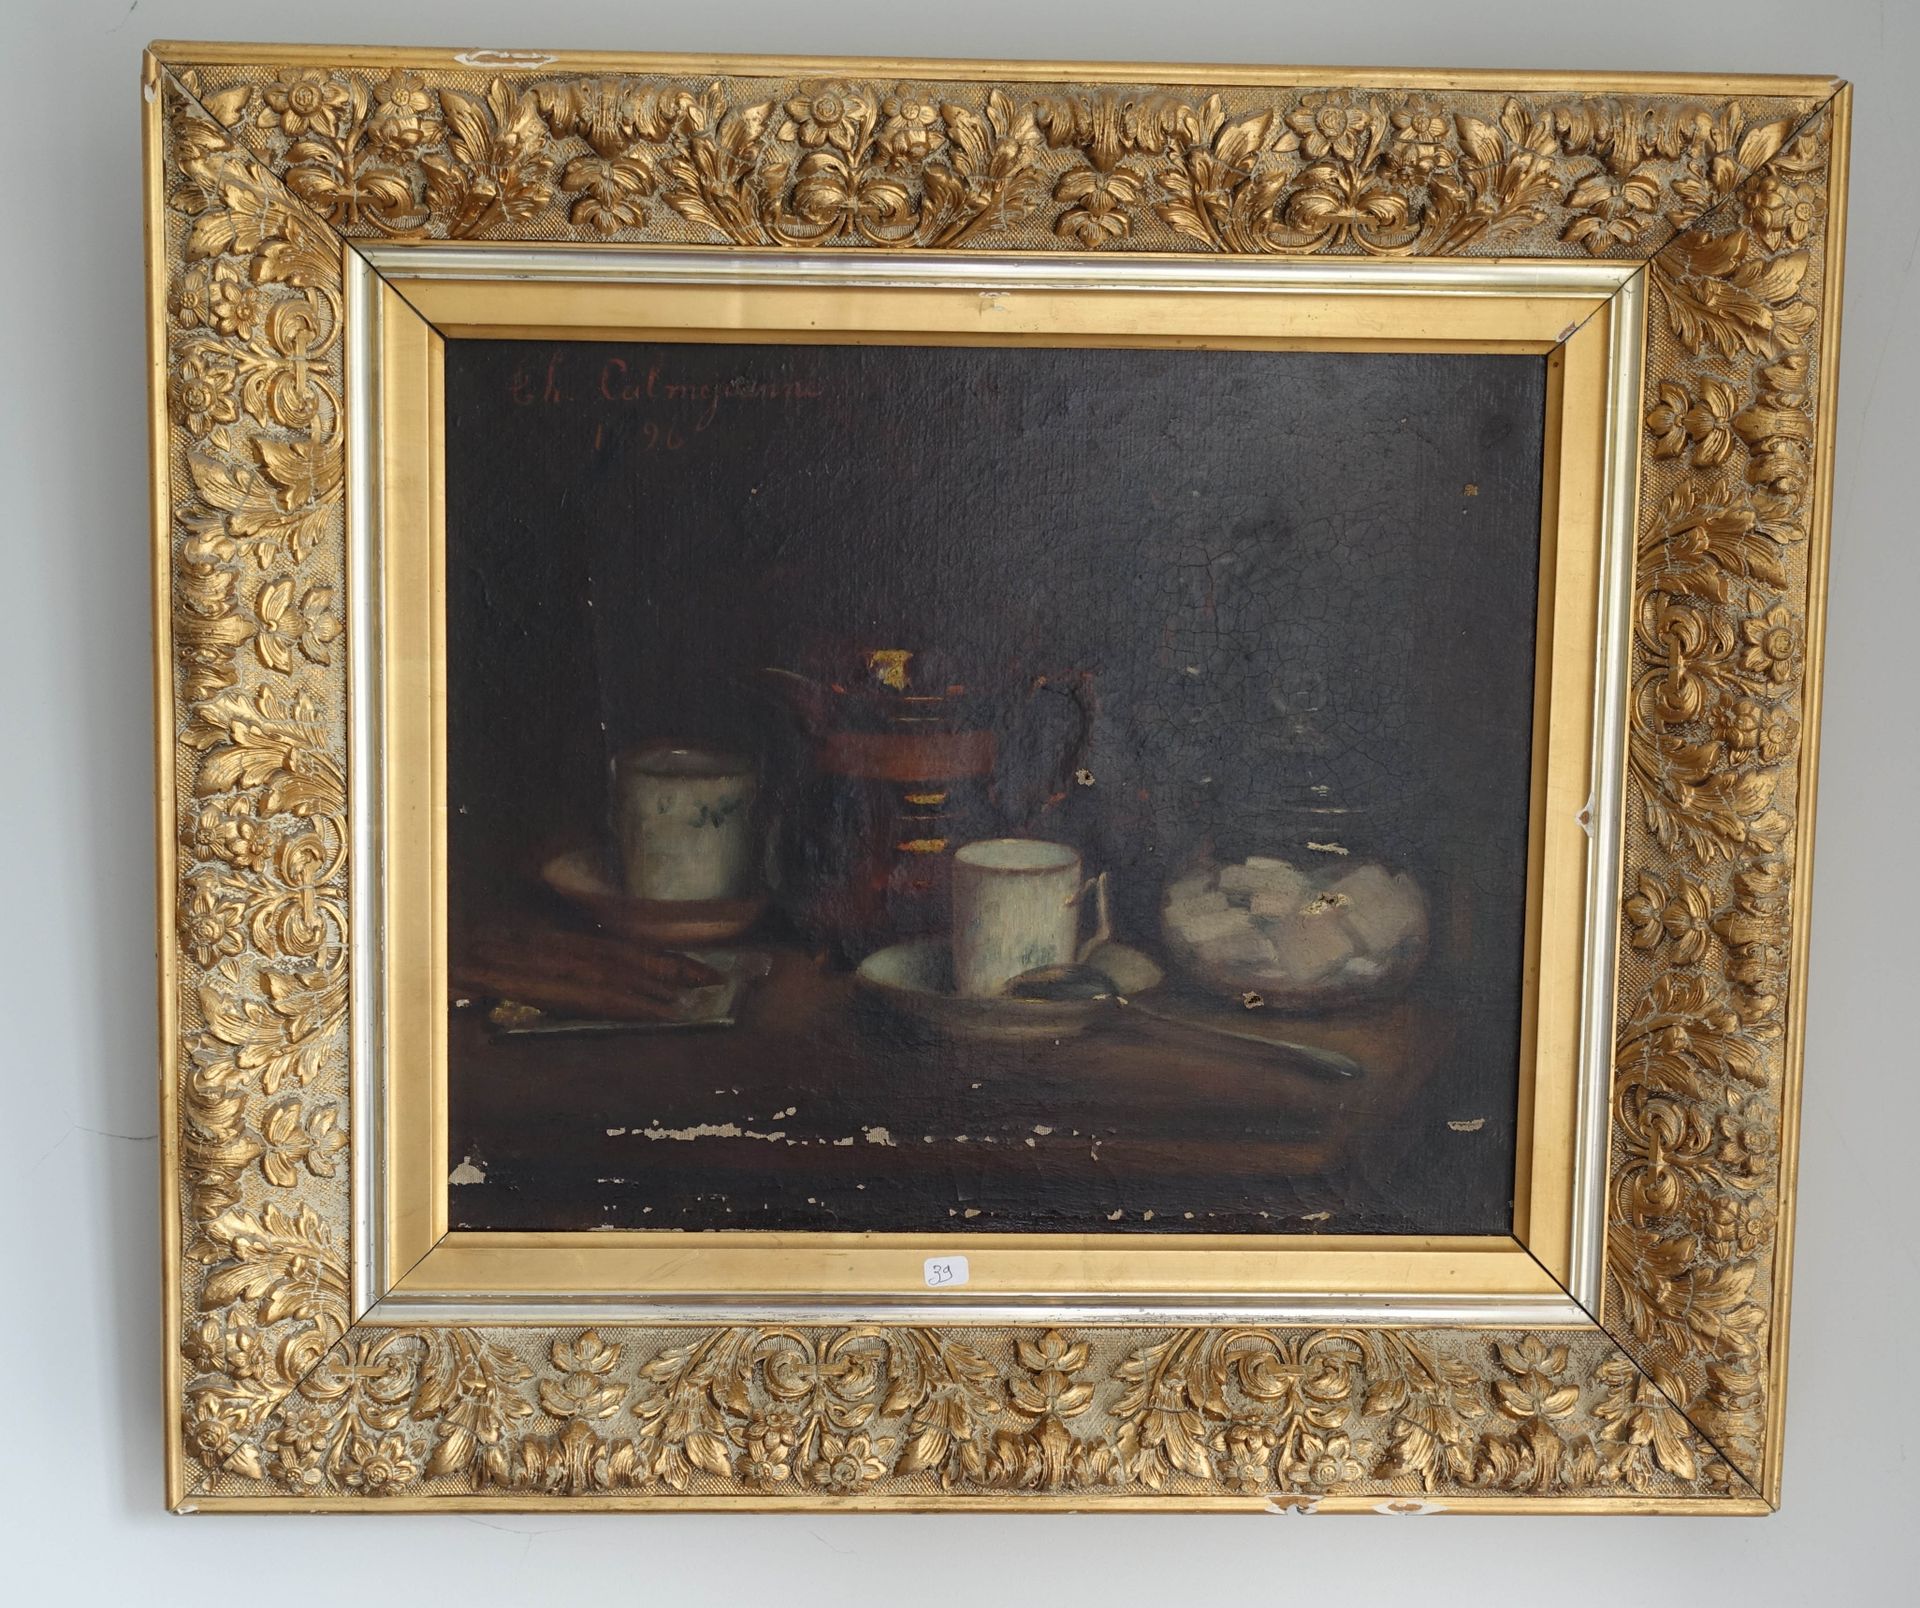 Null FRENCH SCHOOL end of XIXth century
Still life with coffee cups.
Oil on canv&hellip;